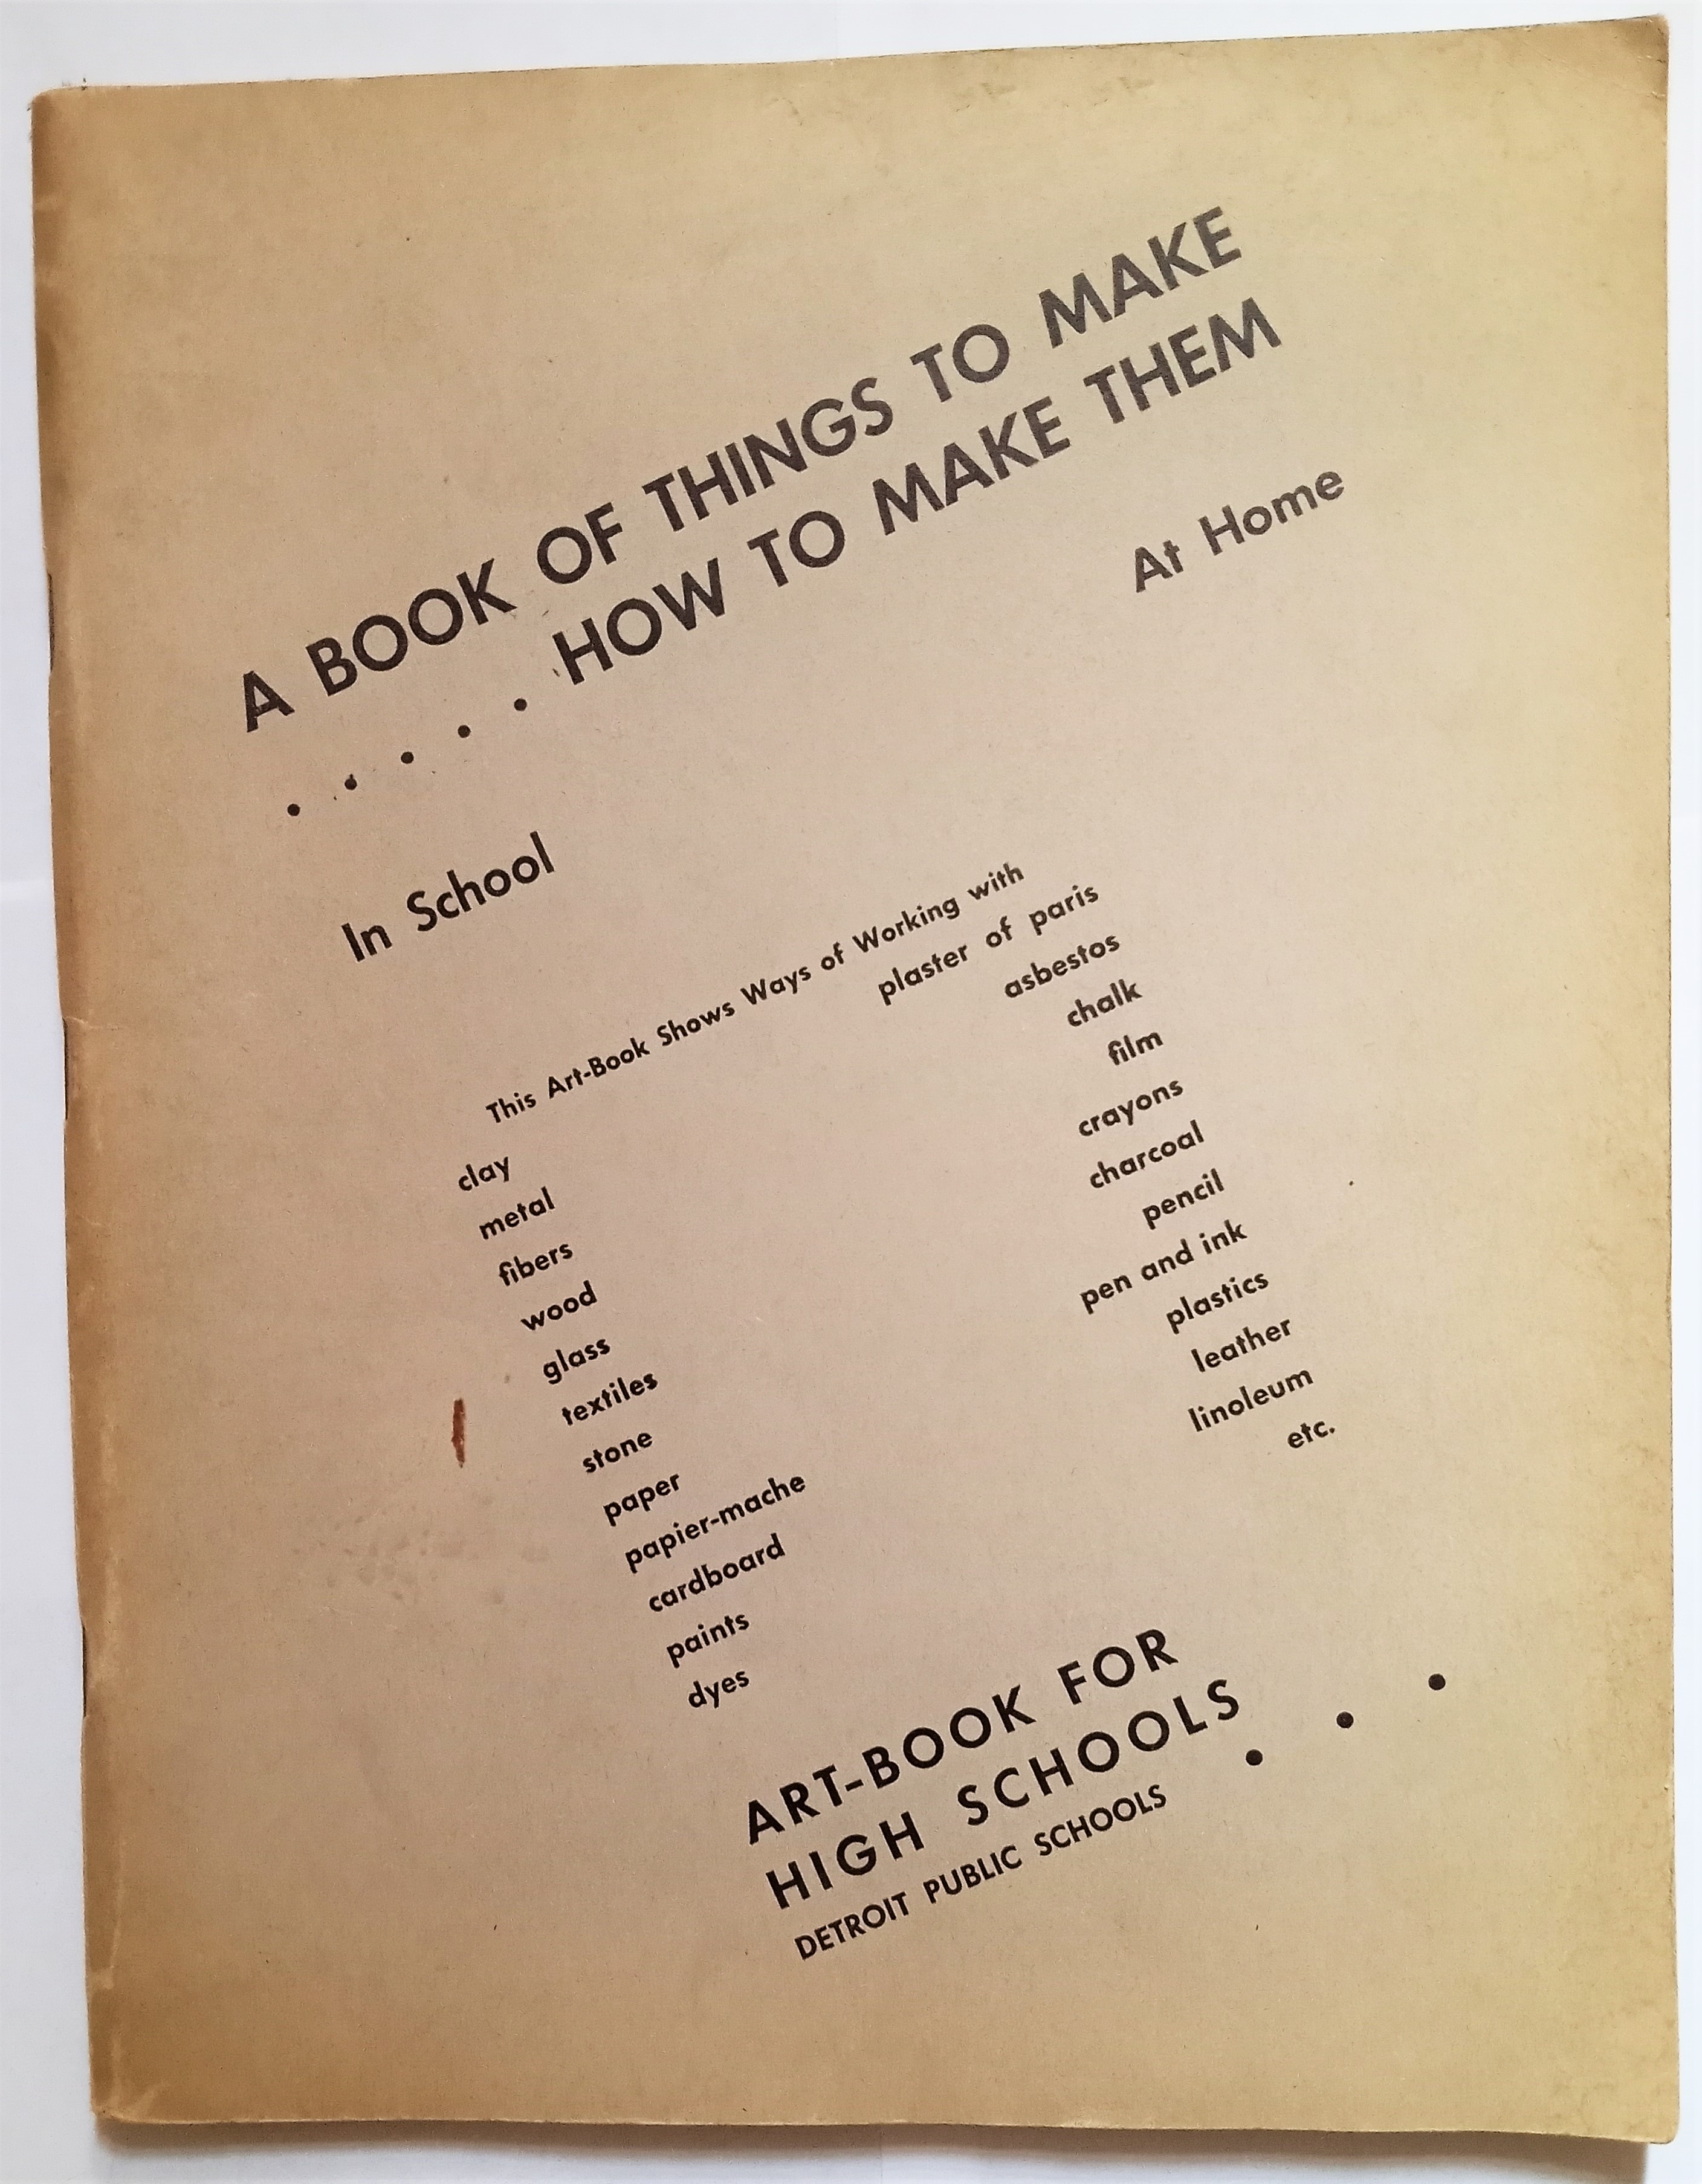 Image for Book of Things to Make and How to Make Them :  In School, at Home, Art Book for High Schools, Detroit Public Schools